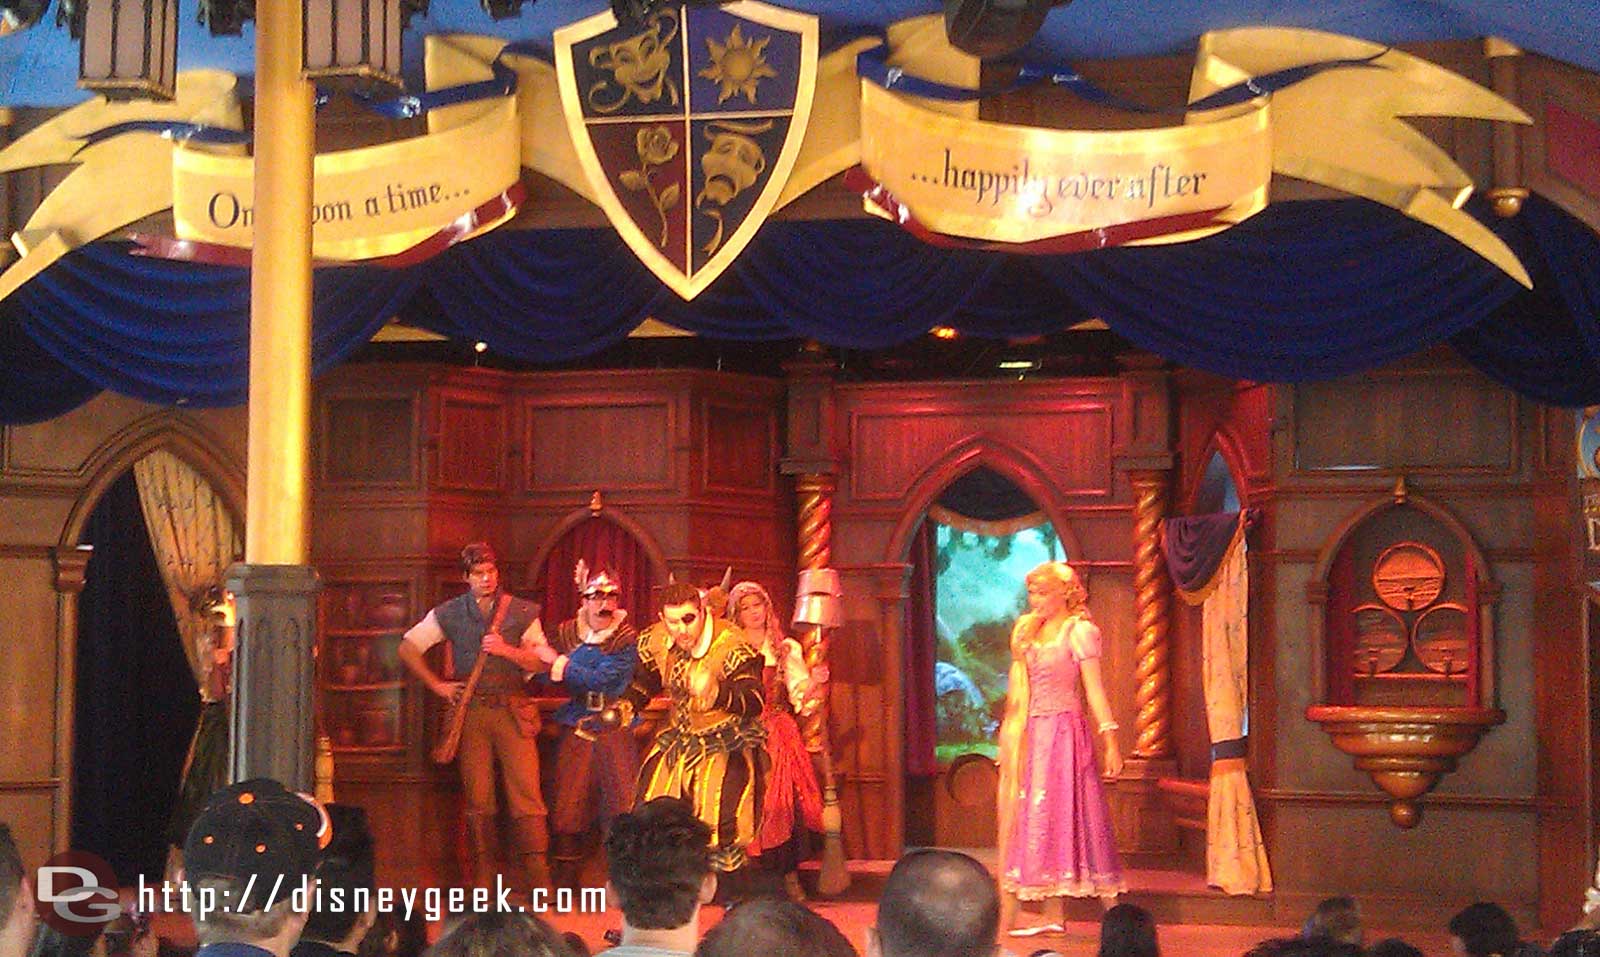 Stopped by the Royal Theatre in Fantasy Faire to see Tangled